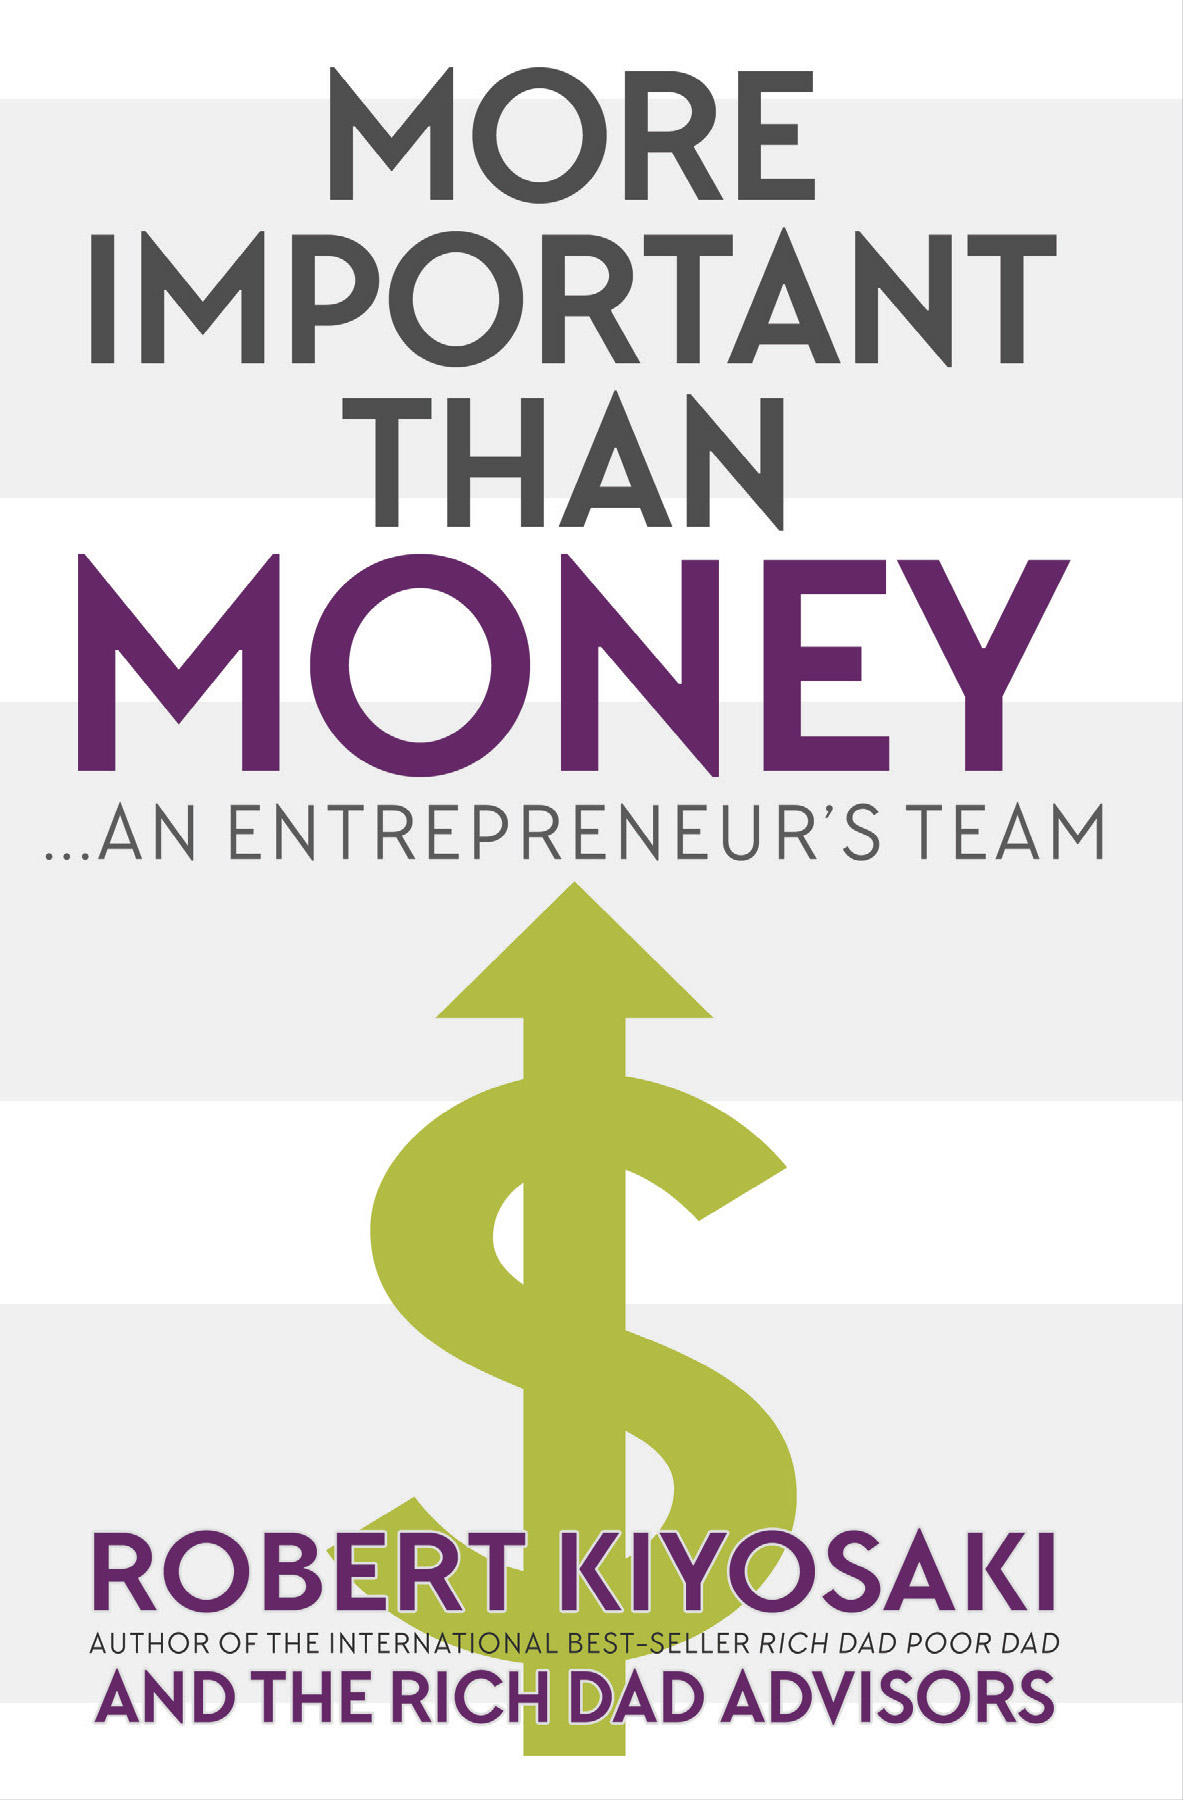 New Book ‘More Important Than Money’ released by Robert Kiyosaki and